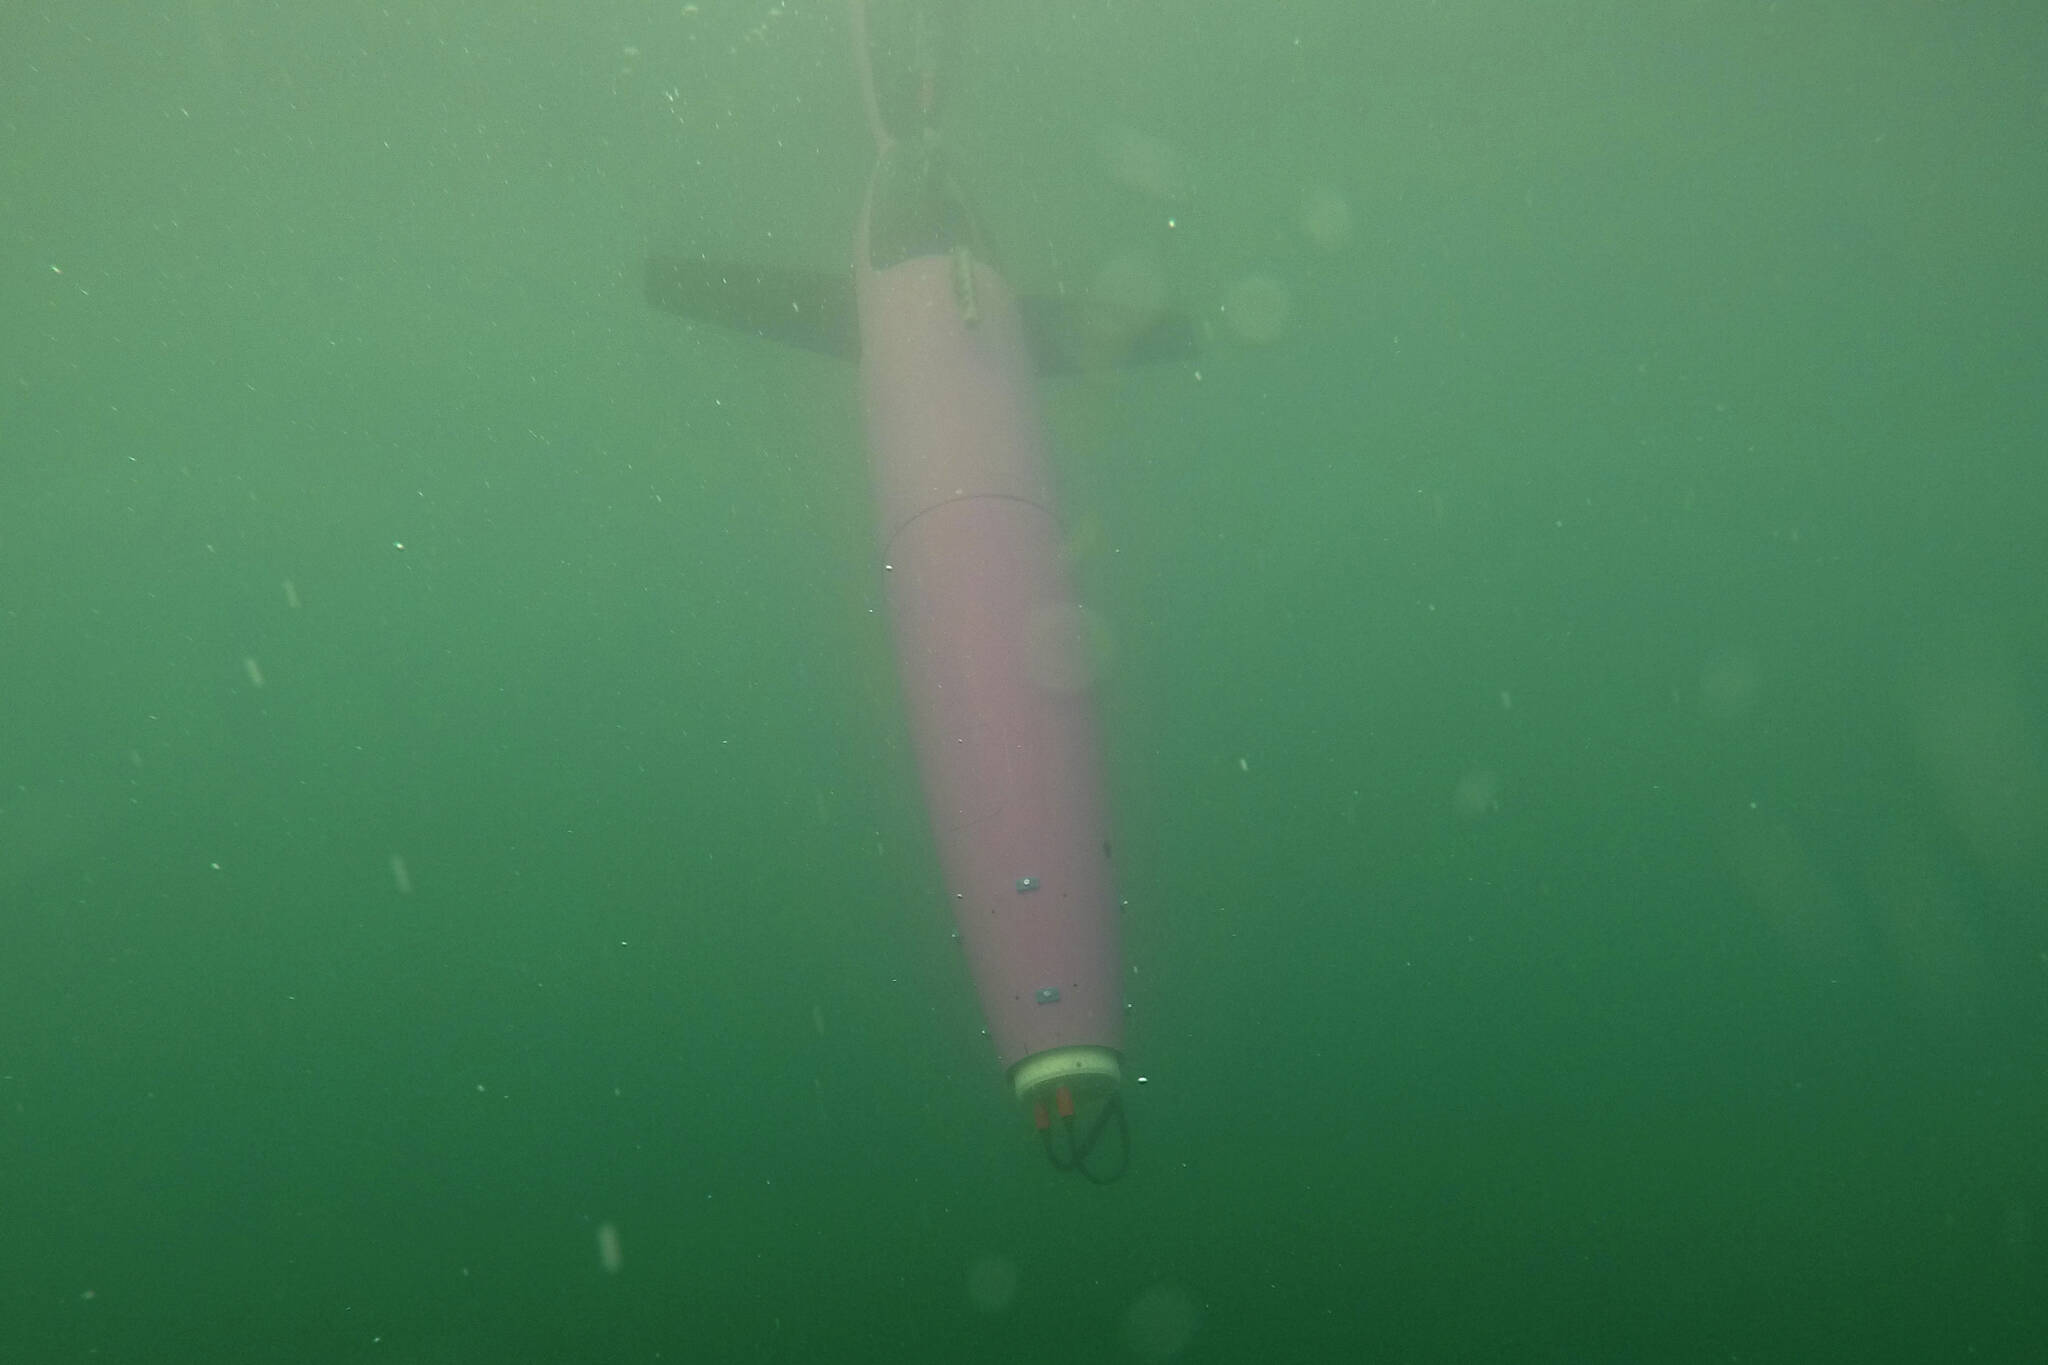 This April 28, 2022, photo provided by Andrew McDonnell shows an underwater glider in the Gulf of Alaska. The glider was fitted with a special sensor that will collect an enormous amount of data to study ocean acidification. (Andrew McDonnell via AP)